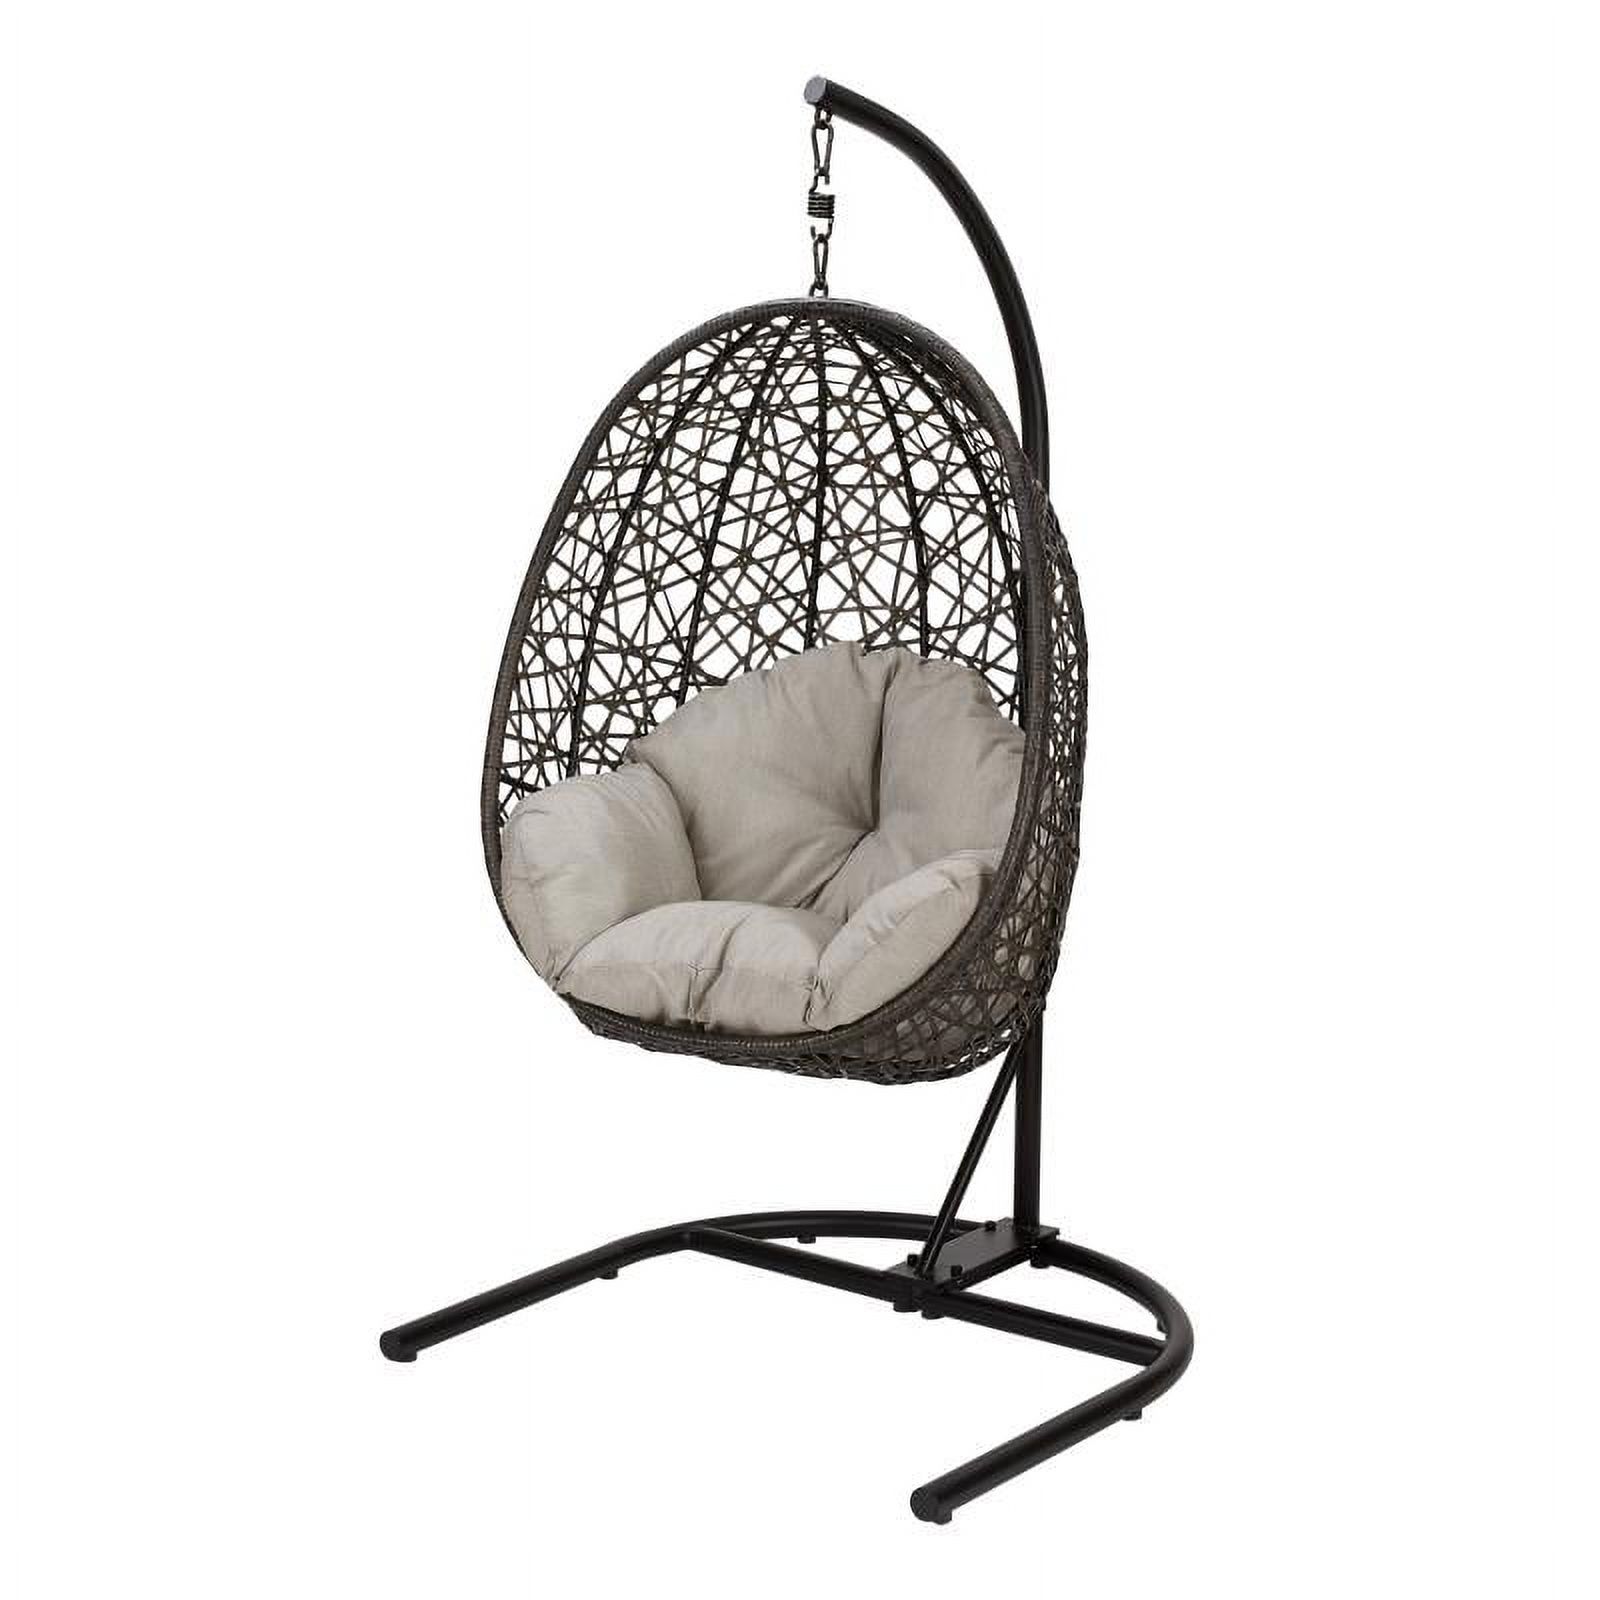 Better Homes & Gardens Outdoor Lantis Patio Wicker Hanging Egg Chair with Stand - Brown Wicker, Beige Cushion - image 1 of 5